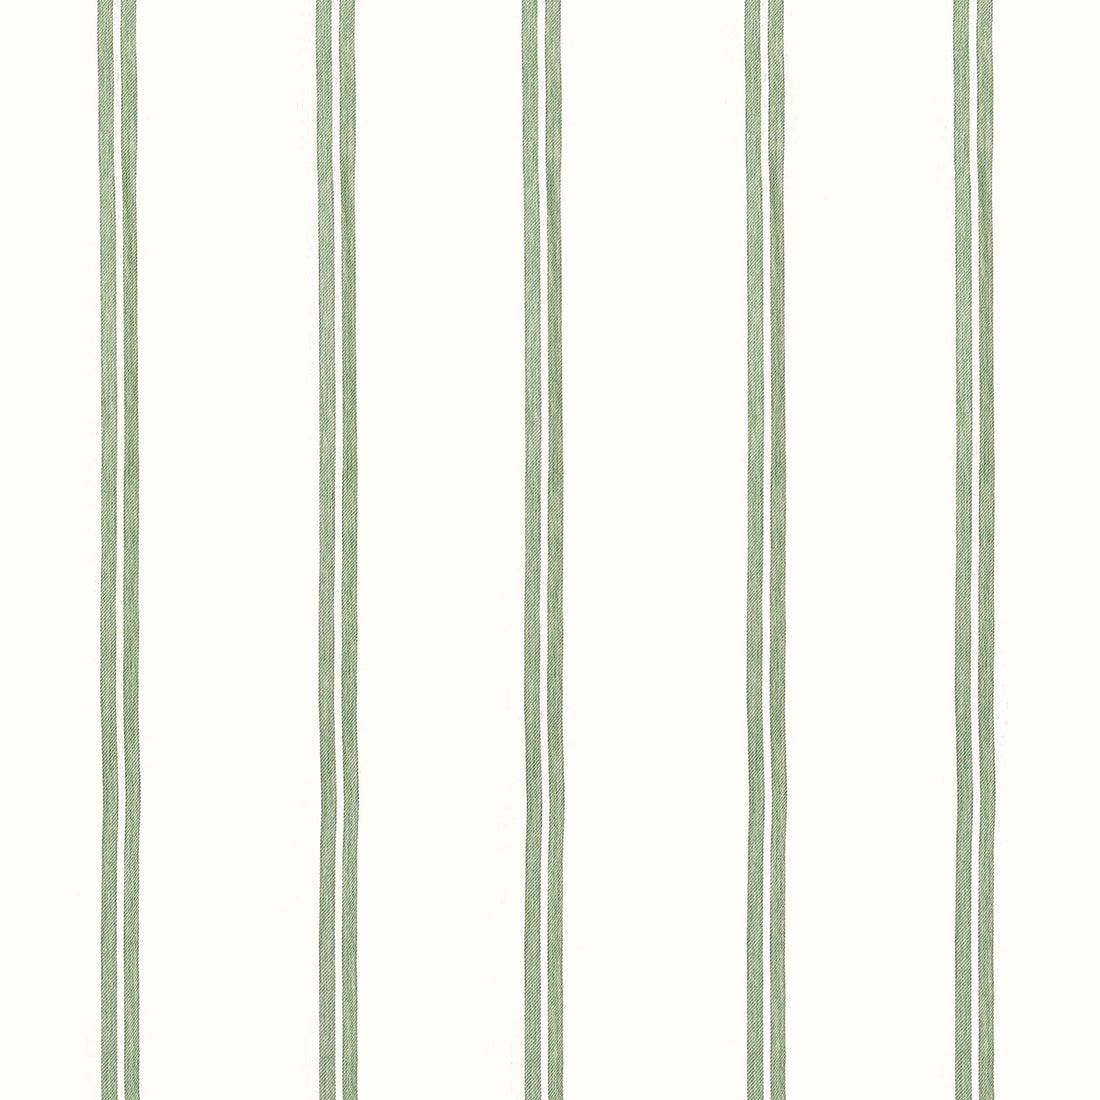 Tandern Stripe fabric in aloe color - pattern number FWW81748 - by Thibaut in the Locale Wide Width collection